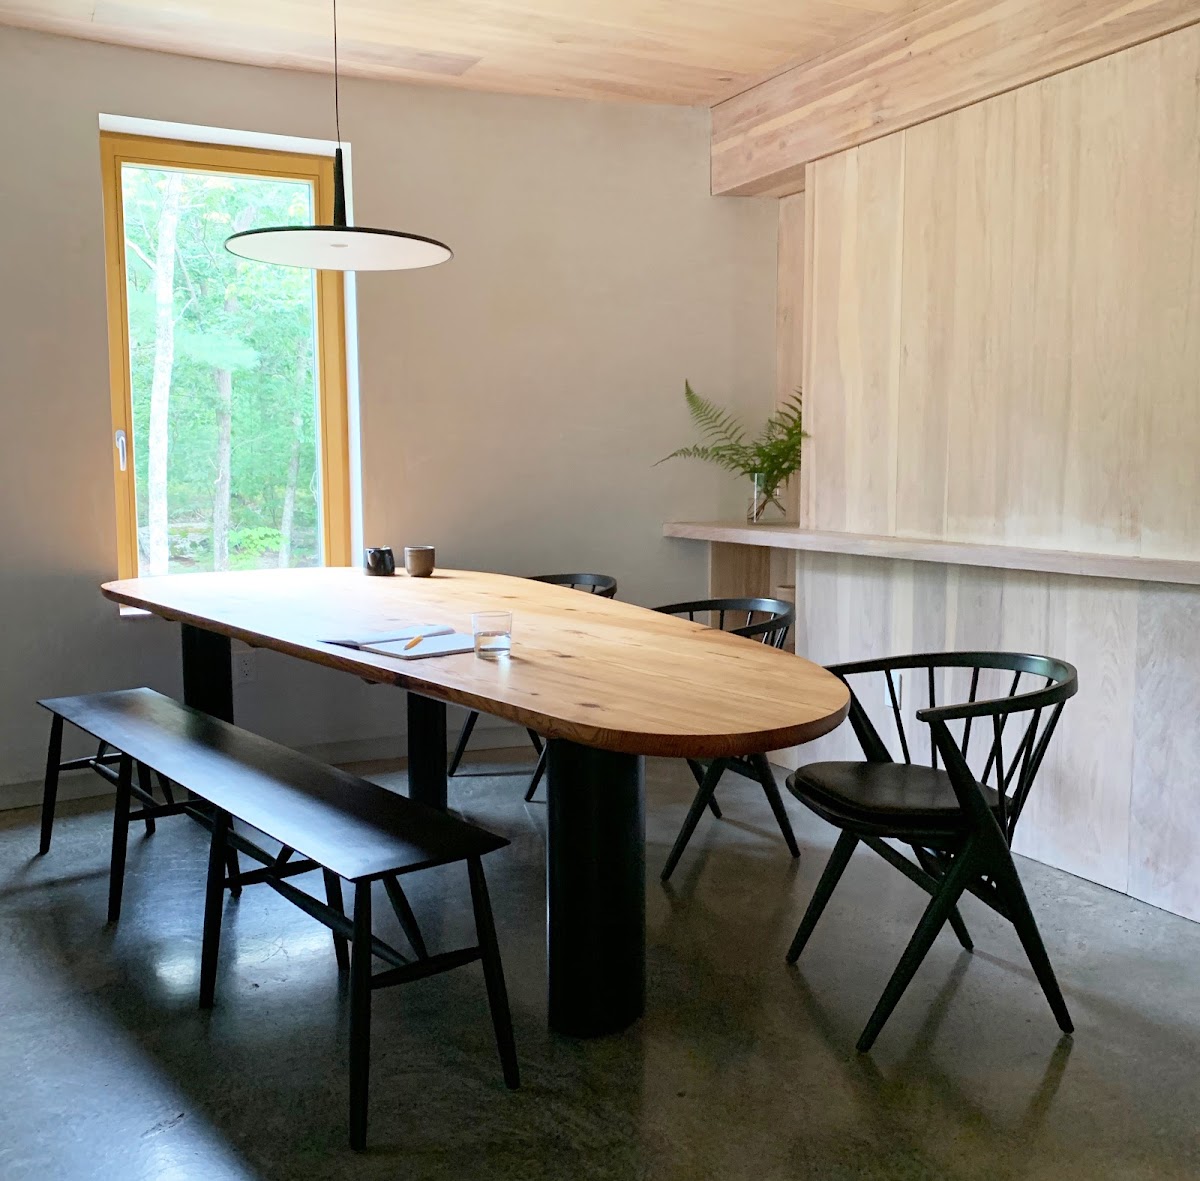 Custom table in kitchen of an energy-efficient home by Laura Briggs BArch 82, Jonathan Knowles BArch 84, and Jonsara Ruth 92 ID.